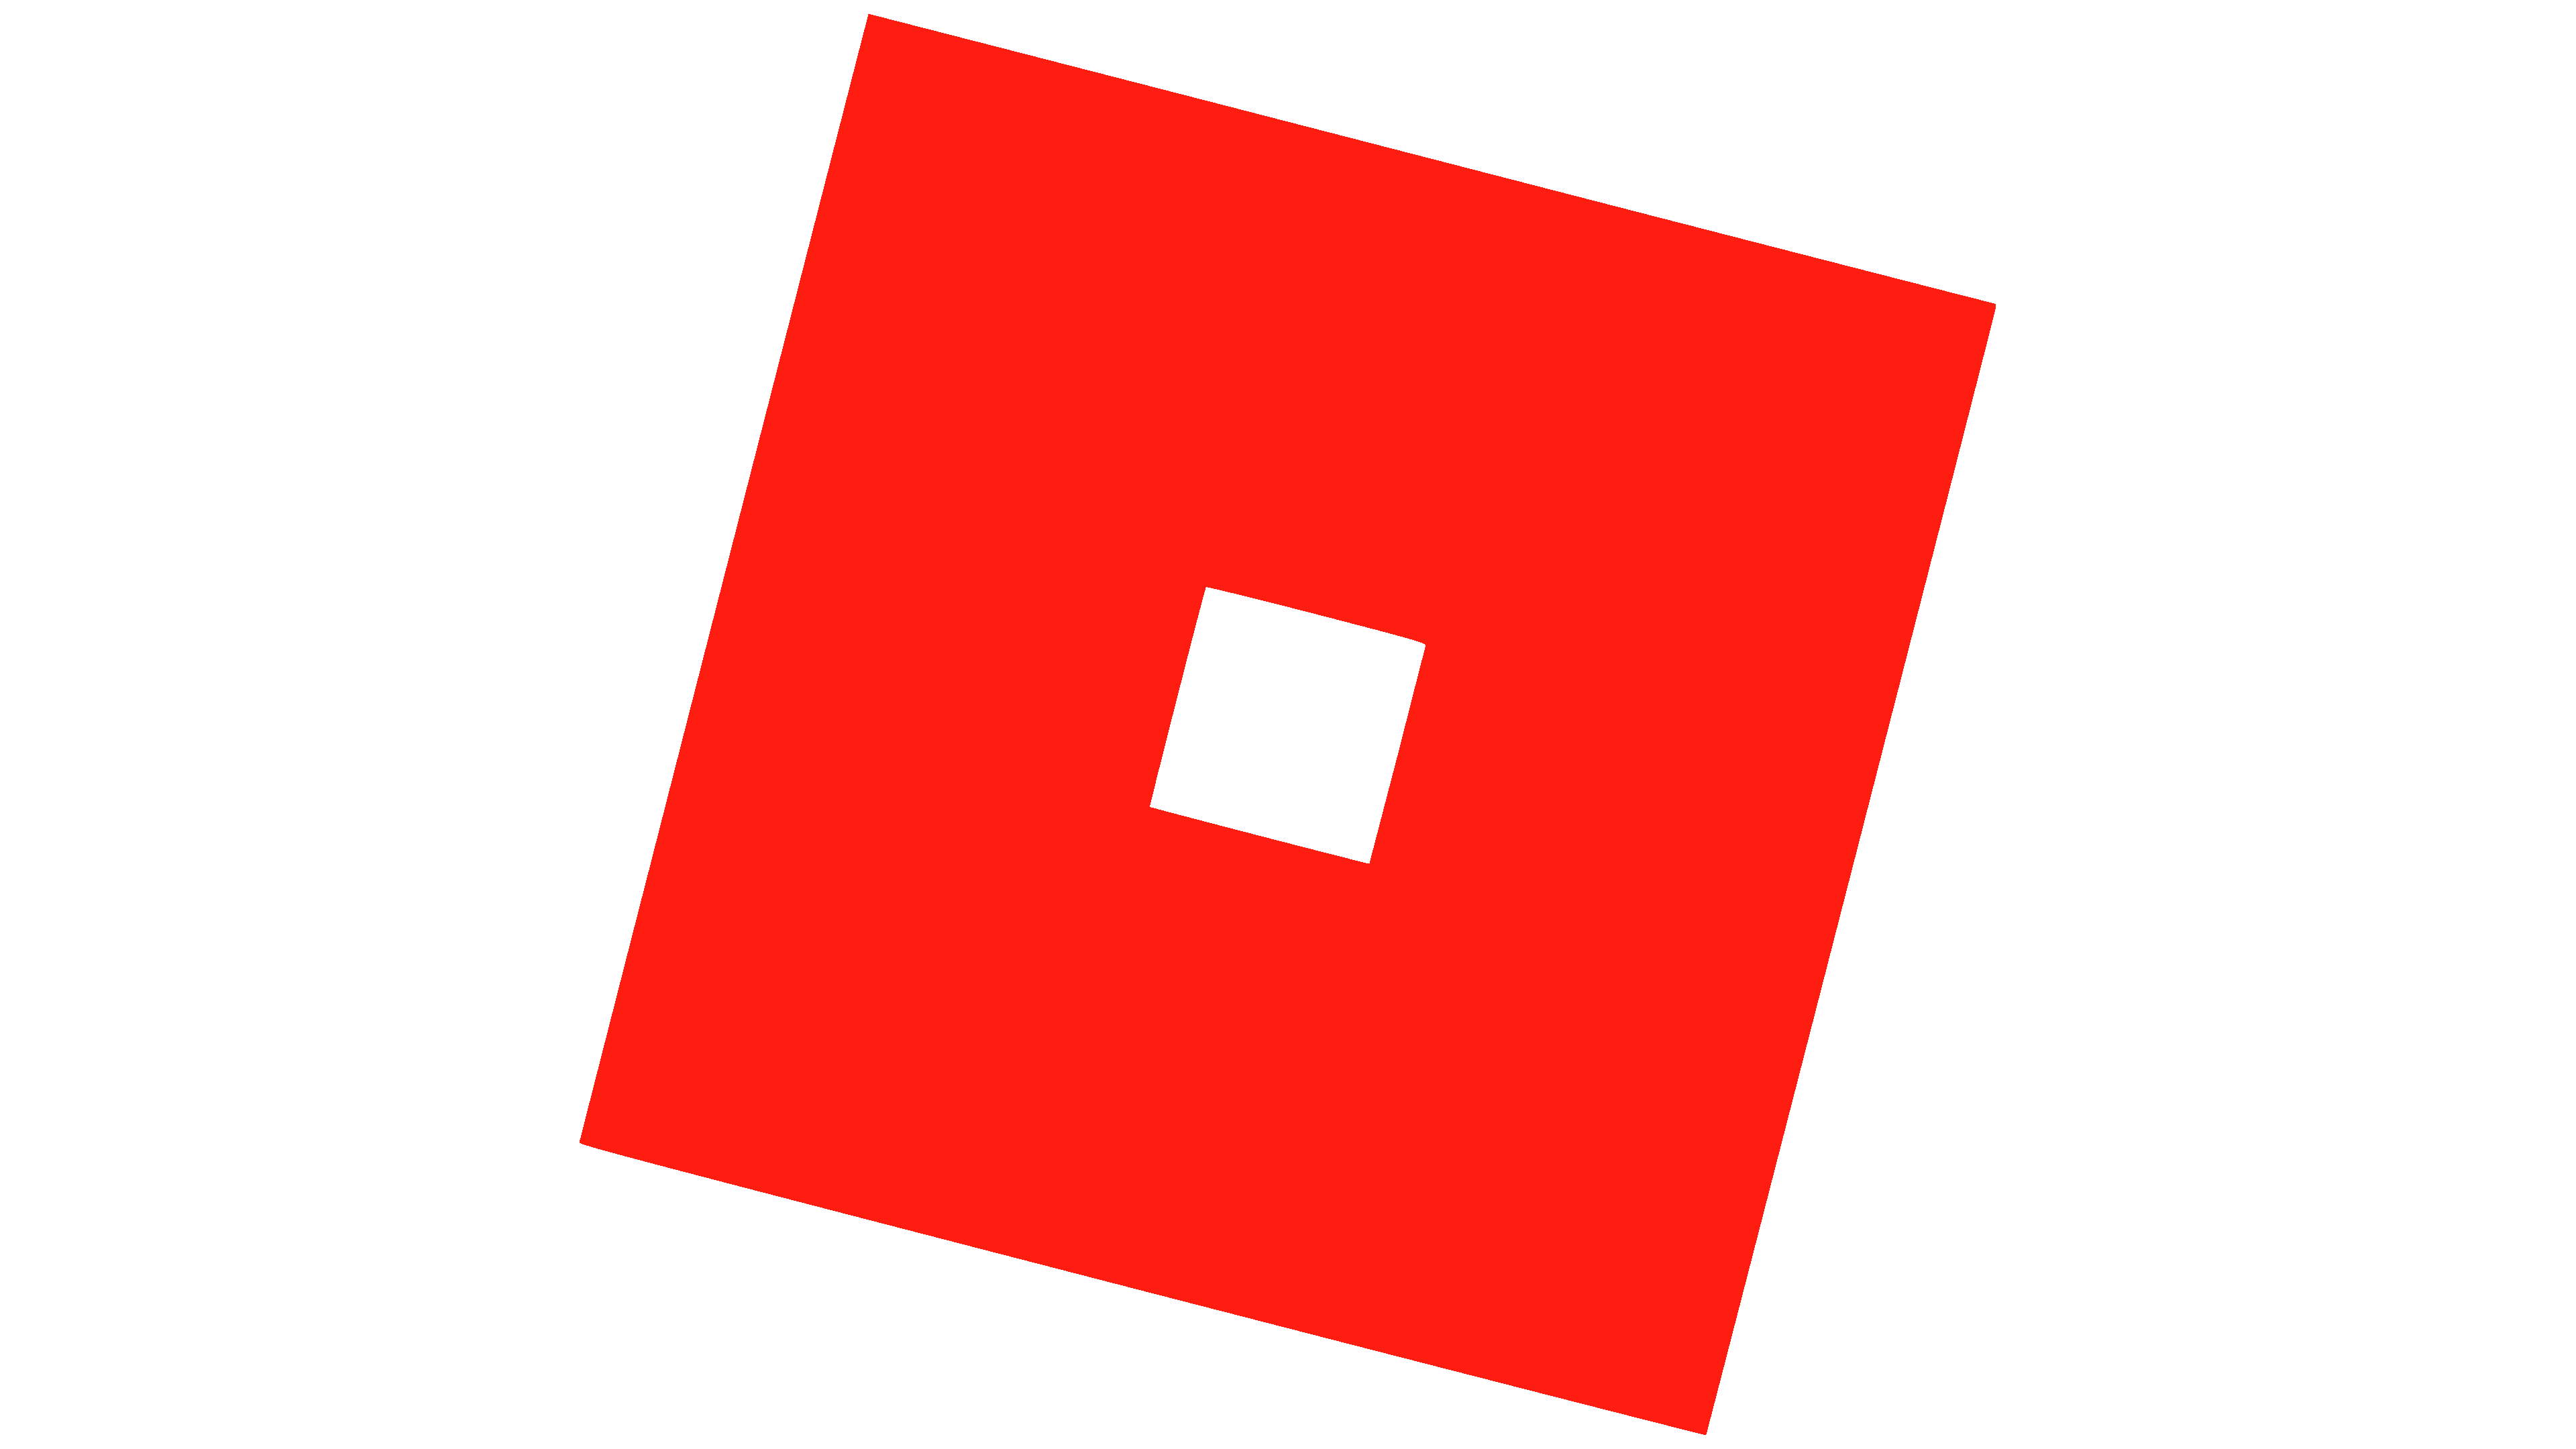 Roblox Logo Design – History, Meaning and Evolution